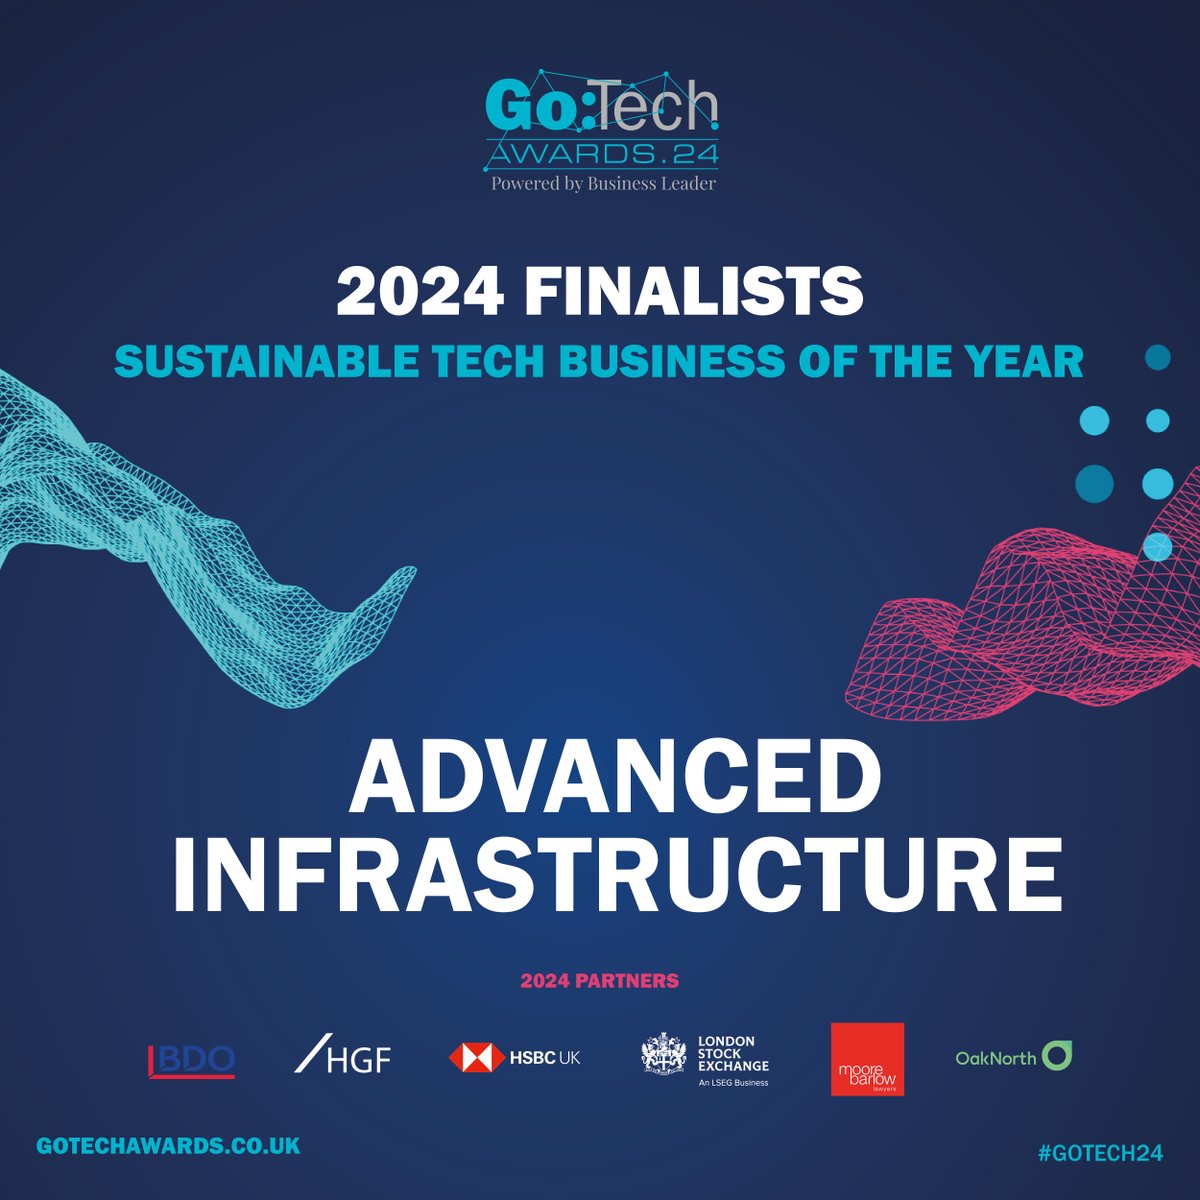 🎉We're thrilled to announce that we have been shortlisted in the 2024 #GoTech awards in the Sustainable Tech Business of the Year category! 

Well done to all finalists, we wish you all the very best of luck! 🏆

#GoTech24 #Sustainability #NetZero #LAEP